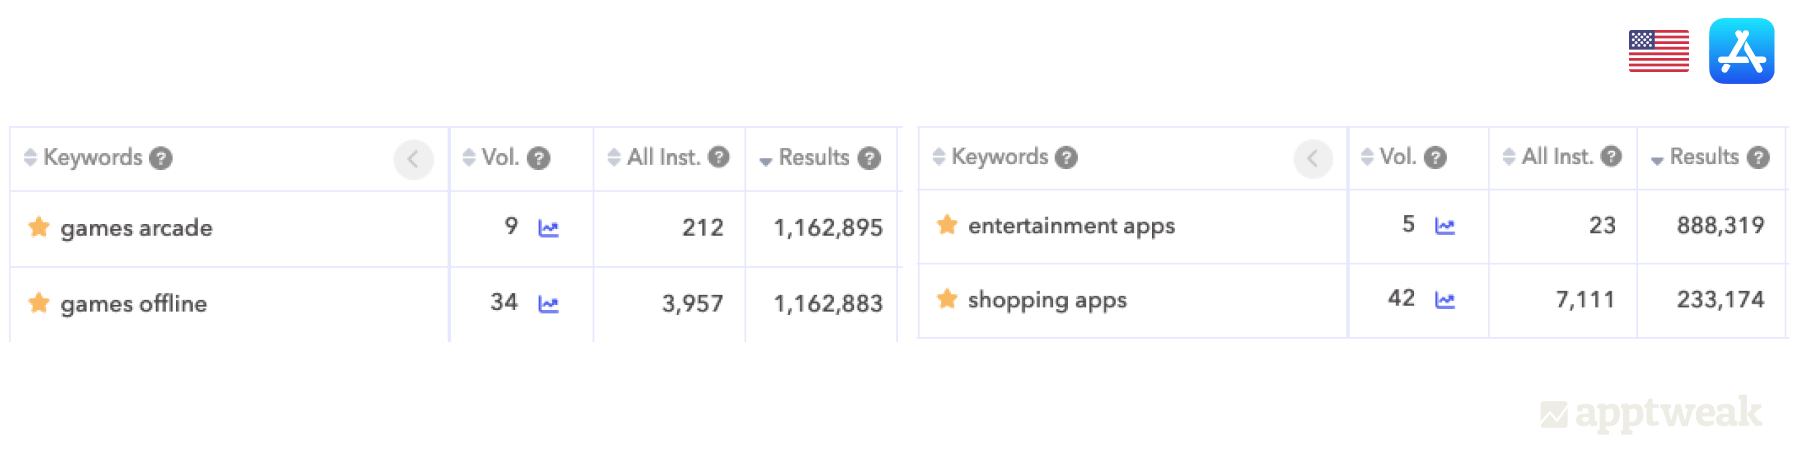 Comparing Results against Volume as a metric to gauge keyword traffic. - iOS US